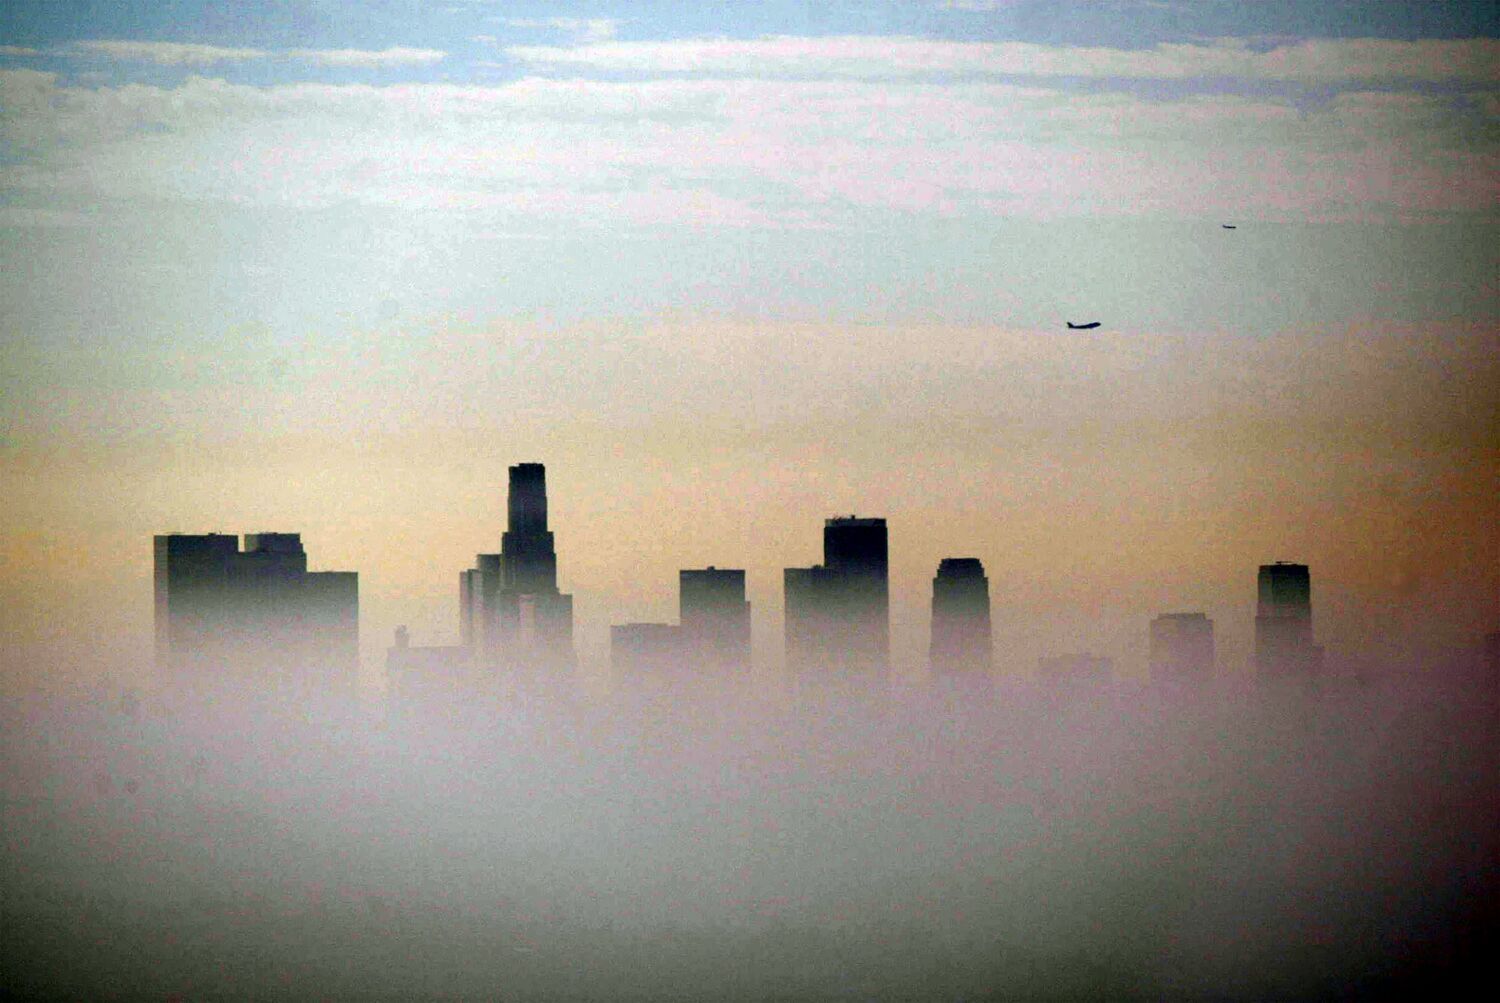 Los Angeles gets F grade for air quality once again in national report